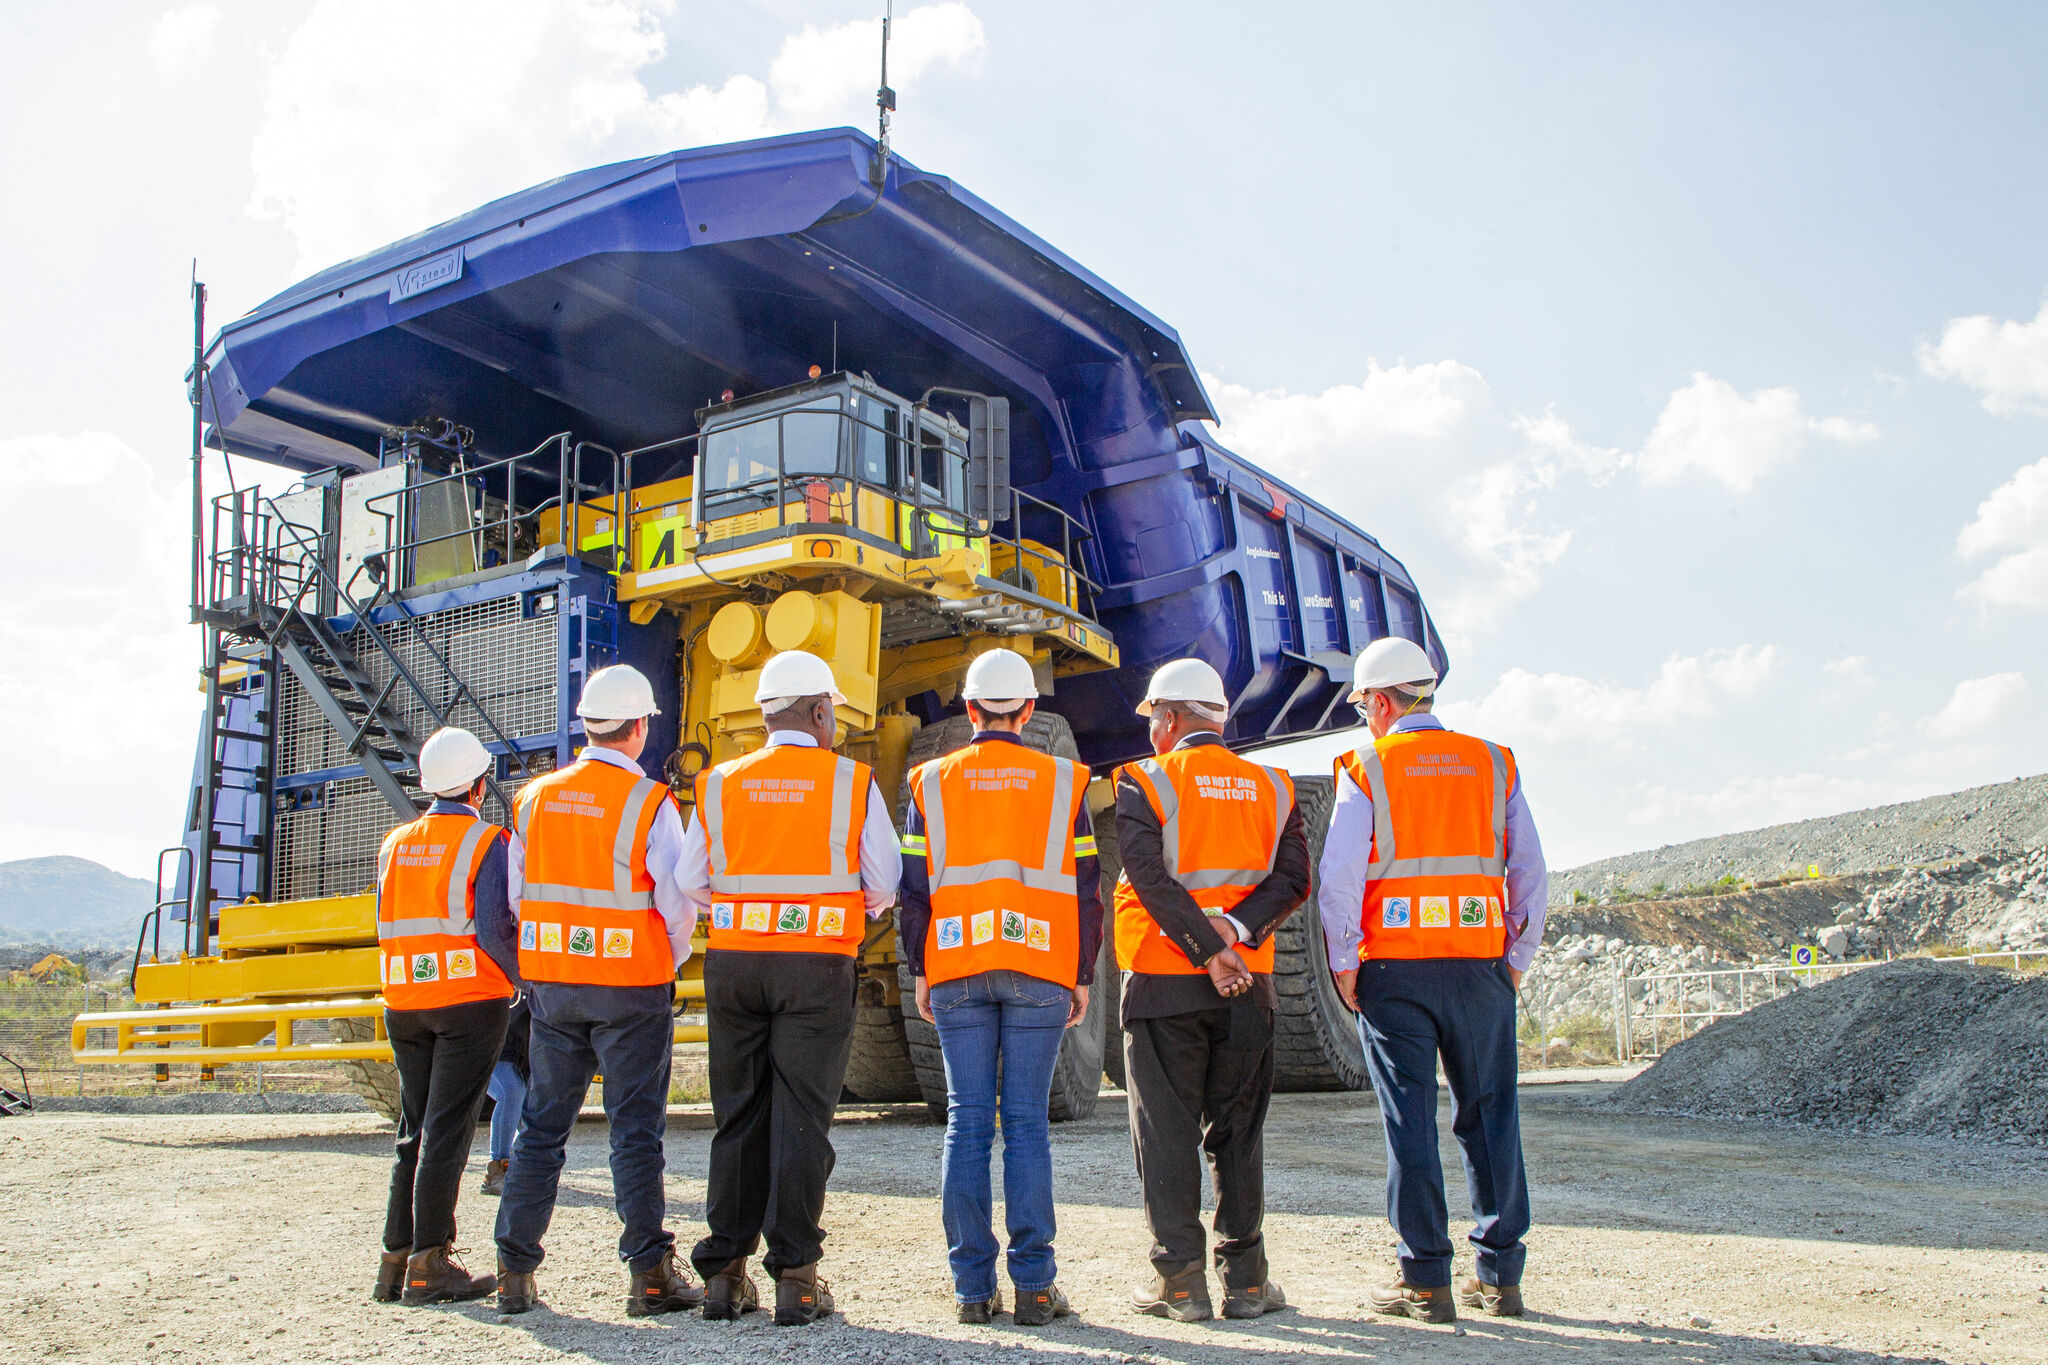 A group of people in PPE standing in front of an ultra-class mining haul truck.